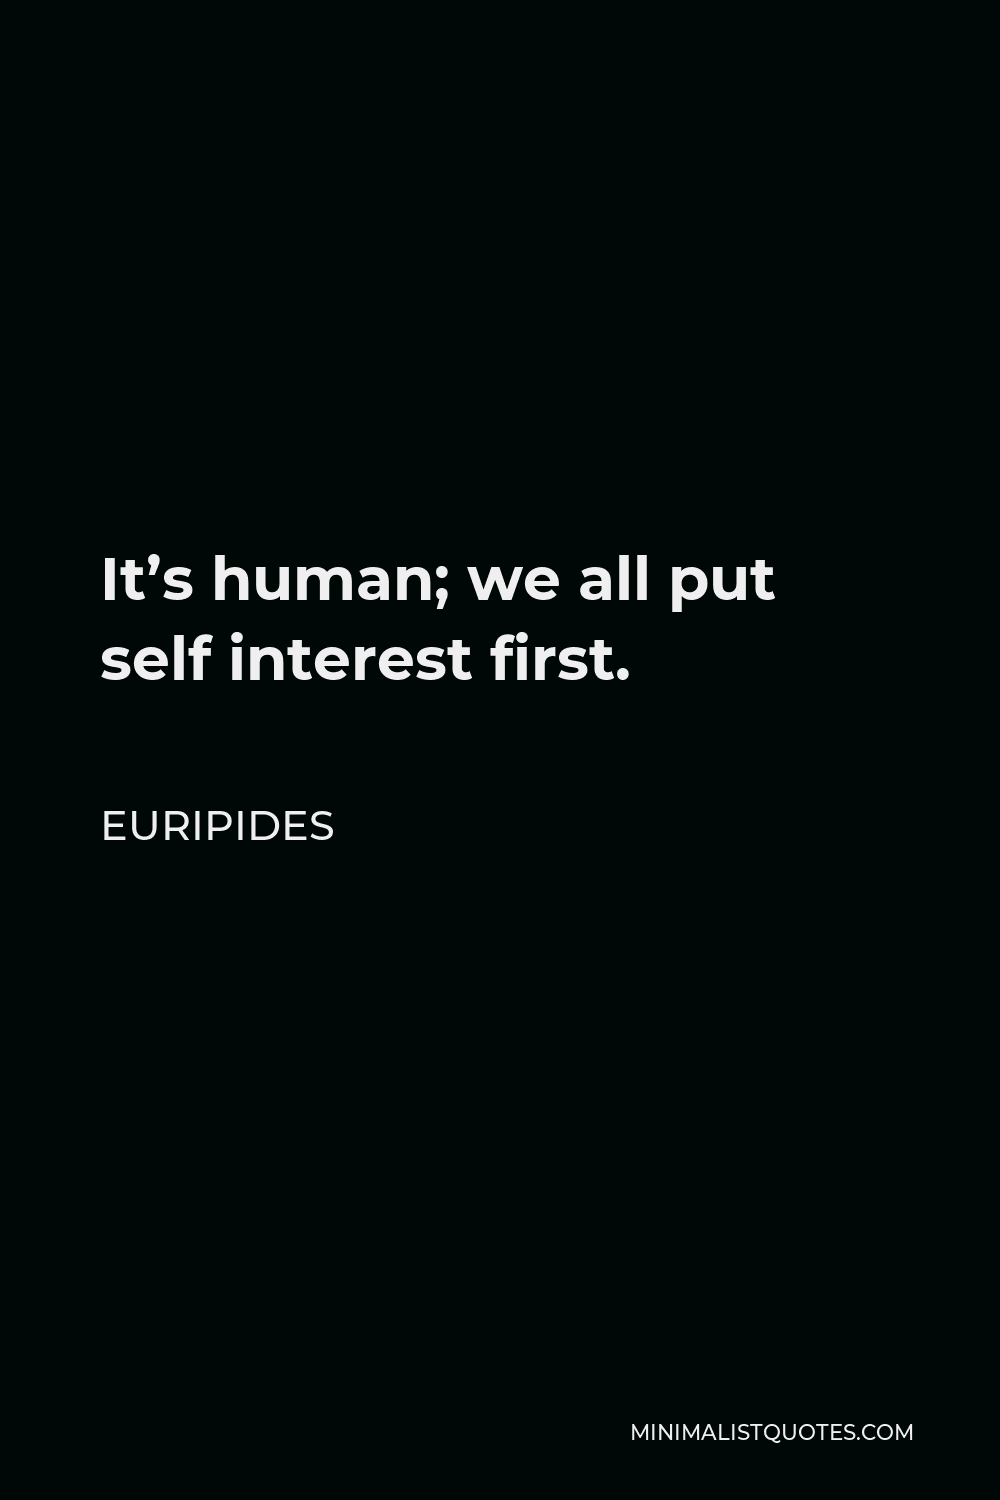 Euripides Quote - It’s human; we all put self interest first.